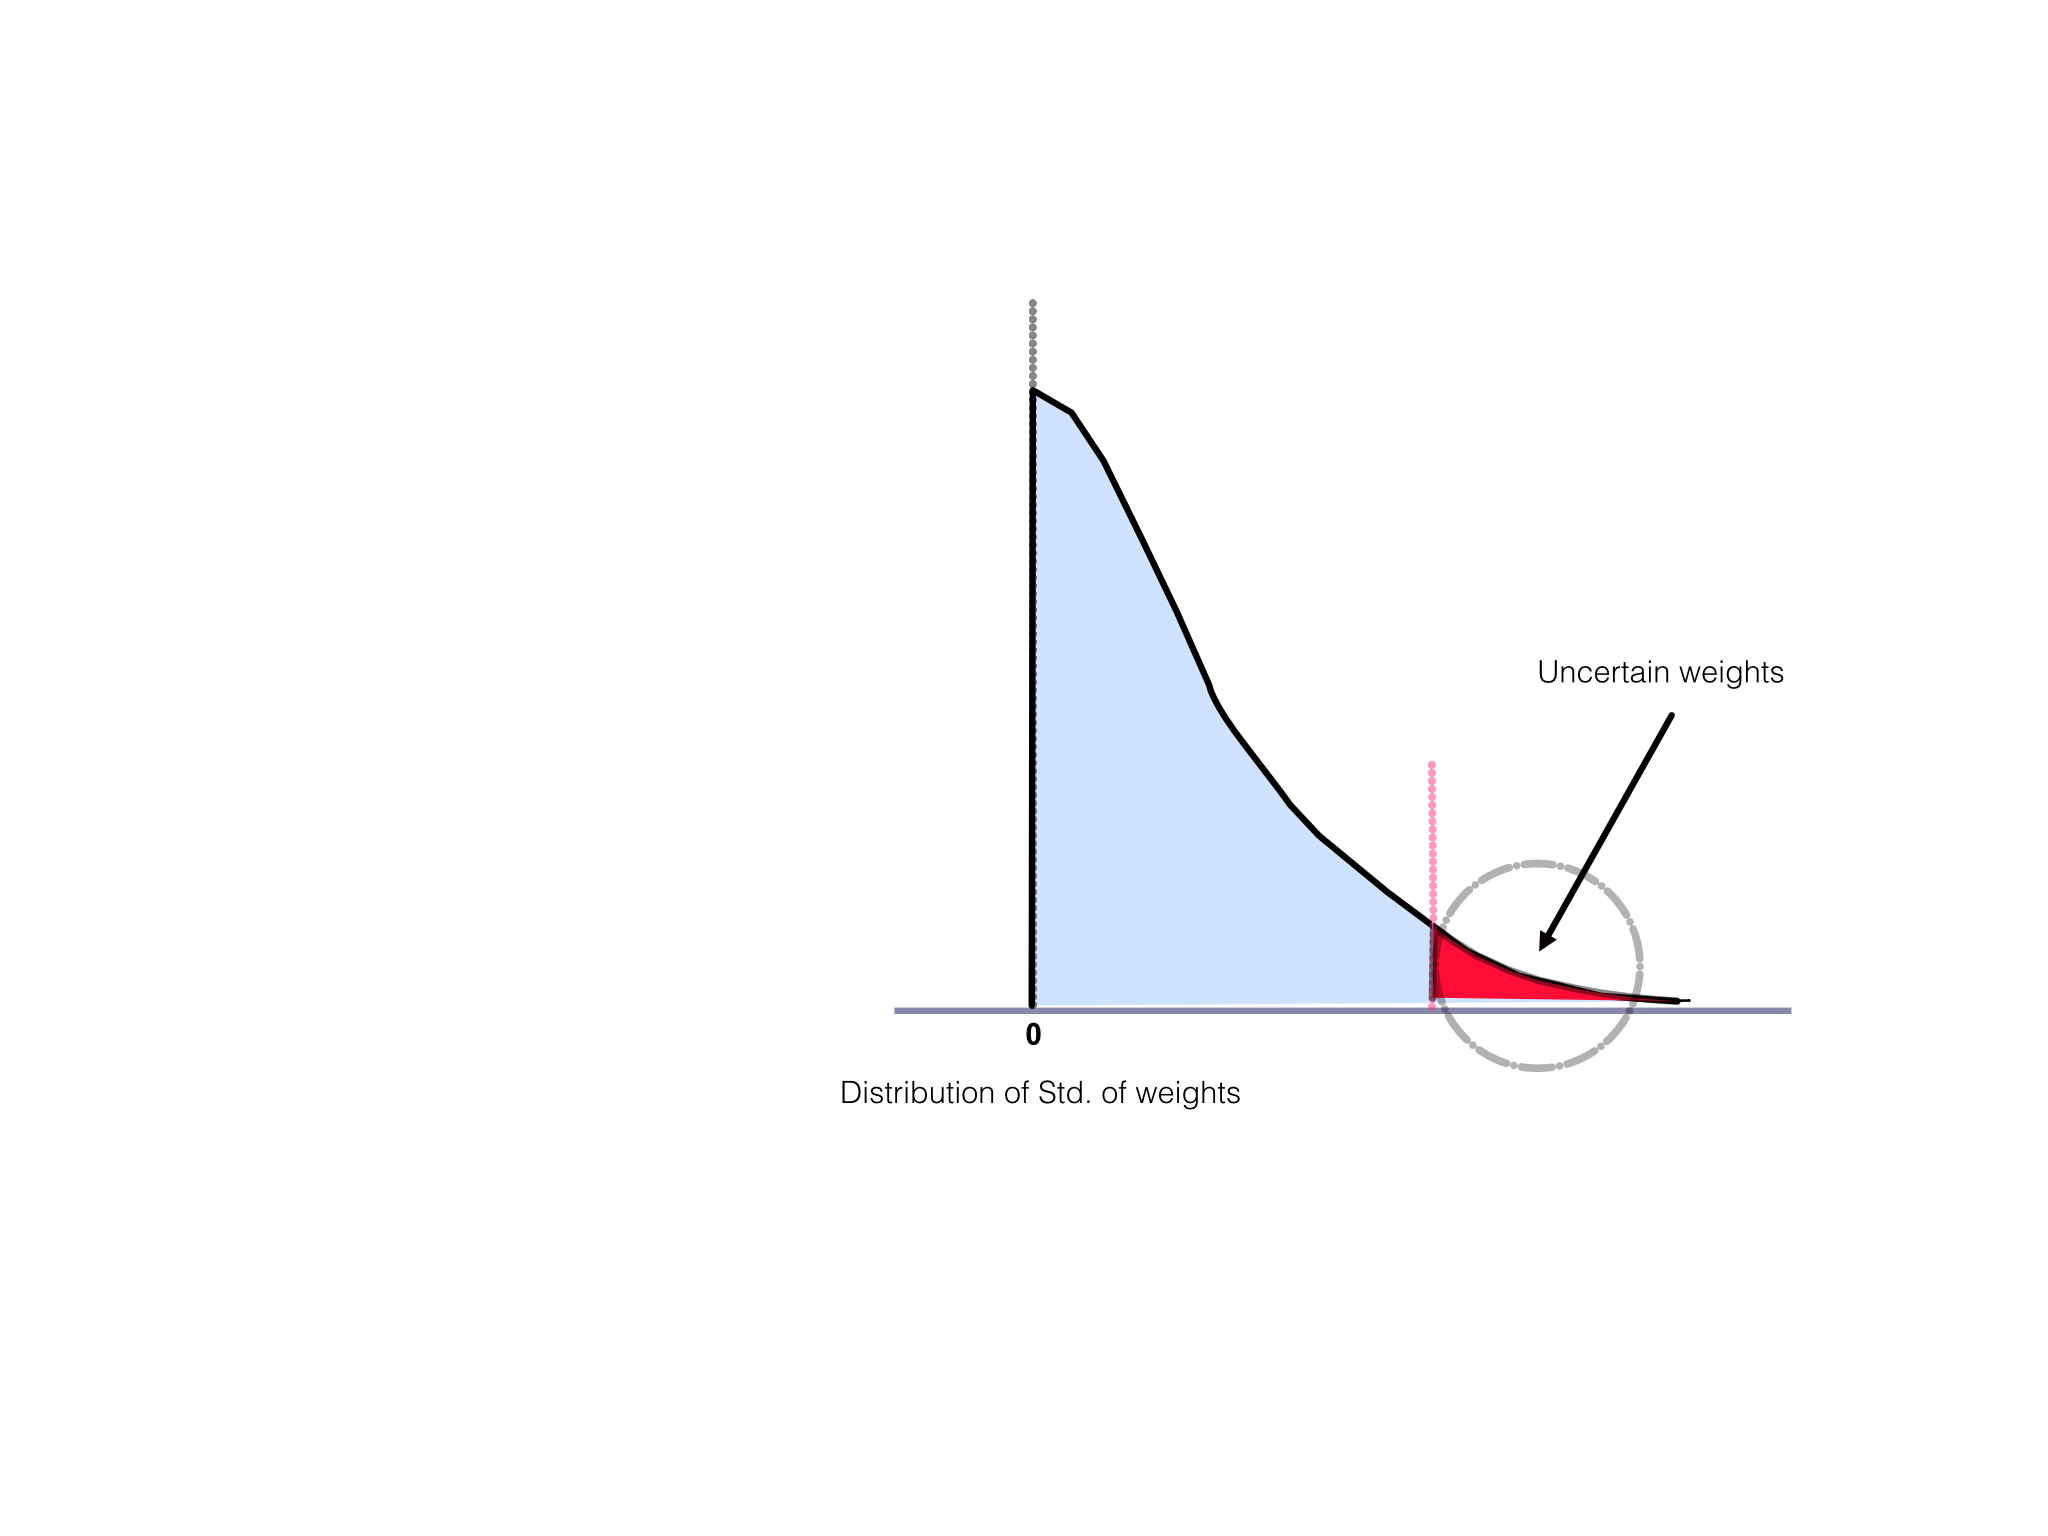 distribution_of_weights